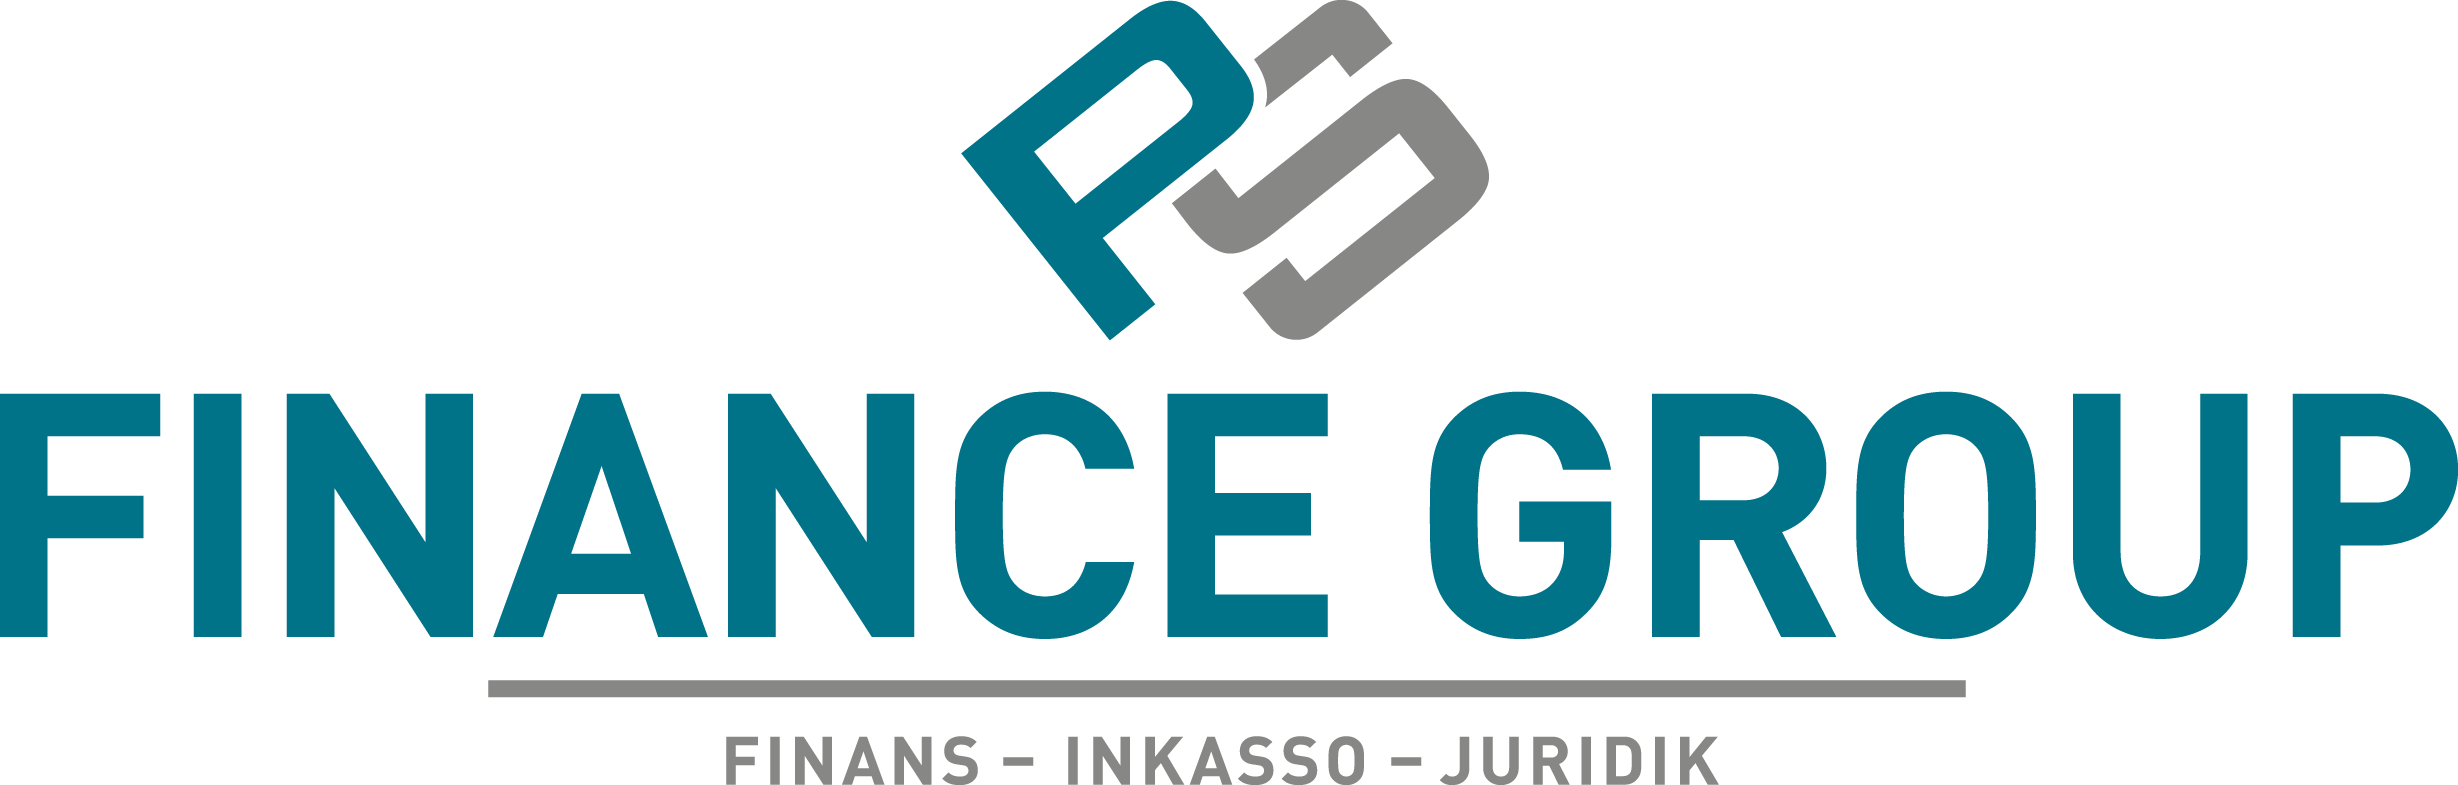 PS Finance Group